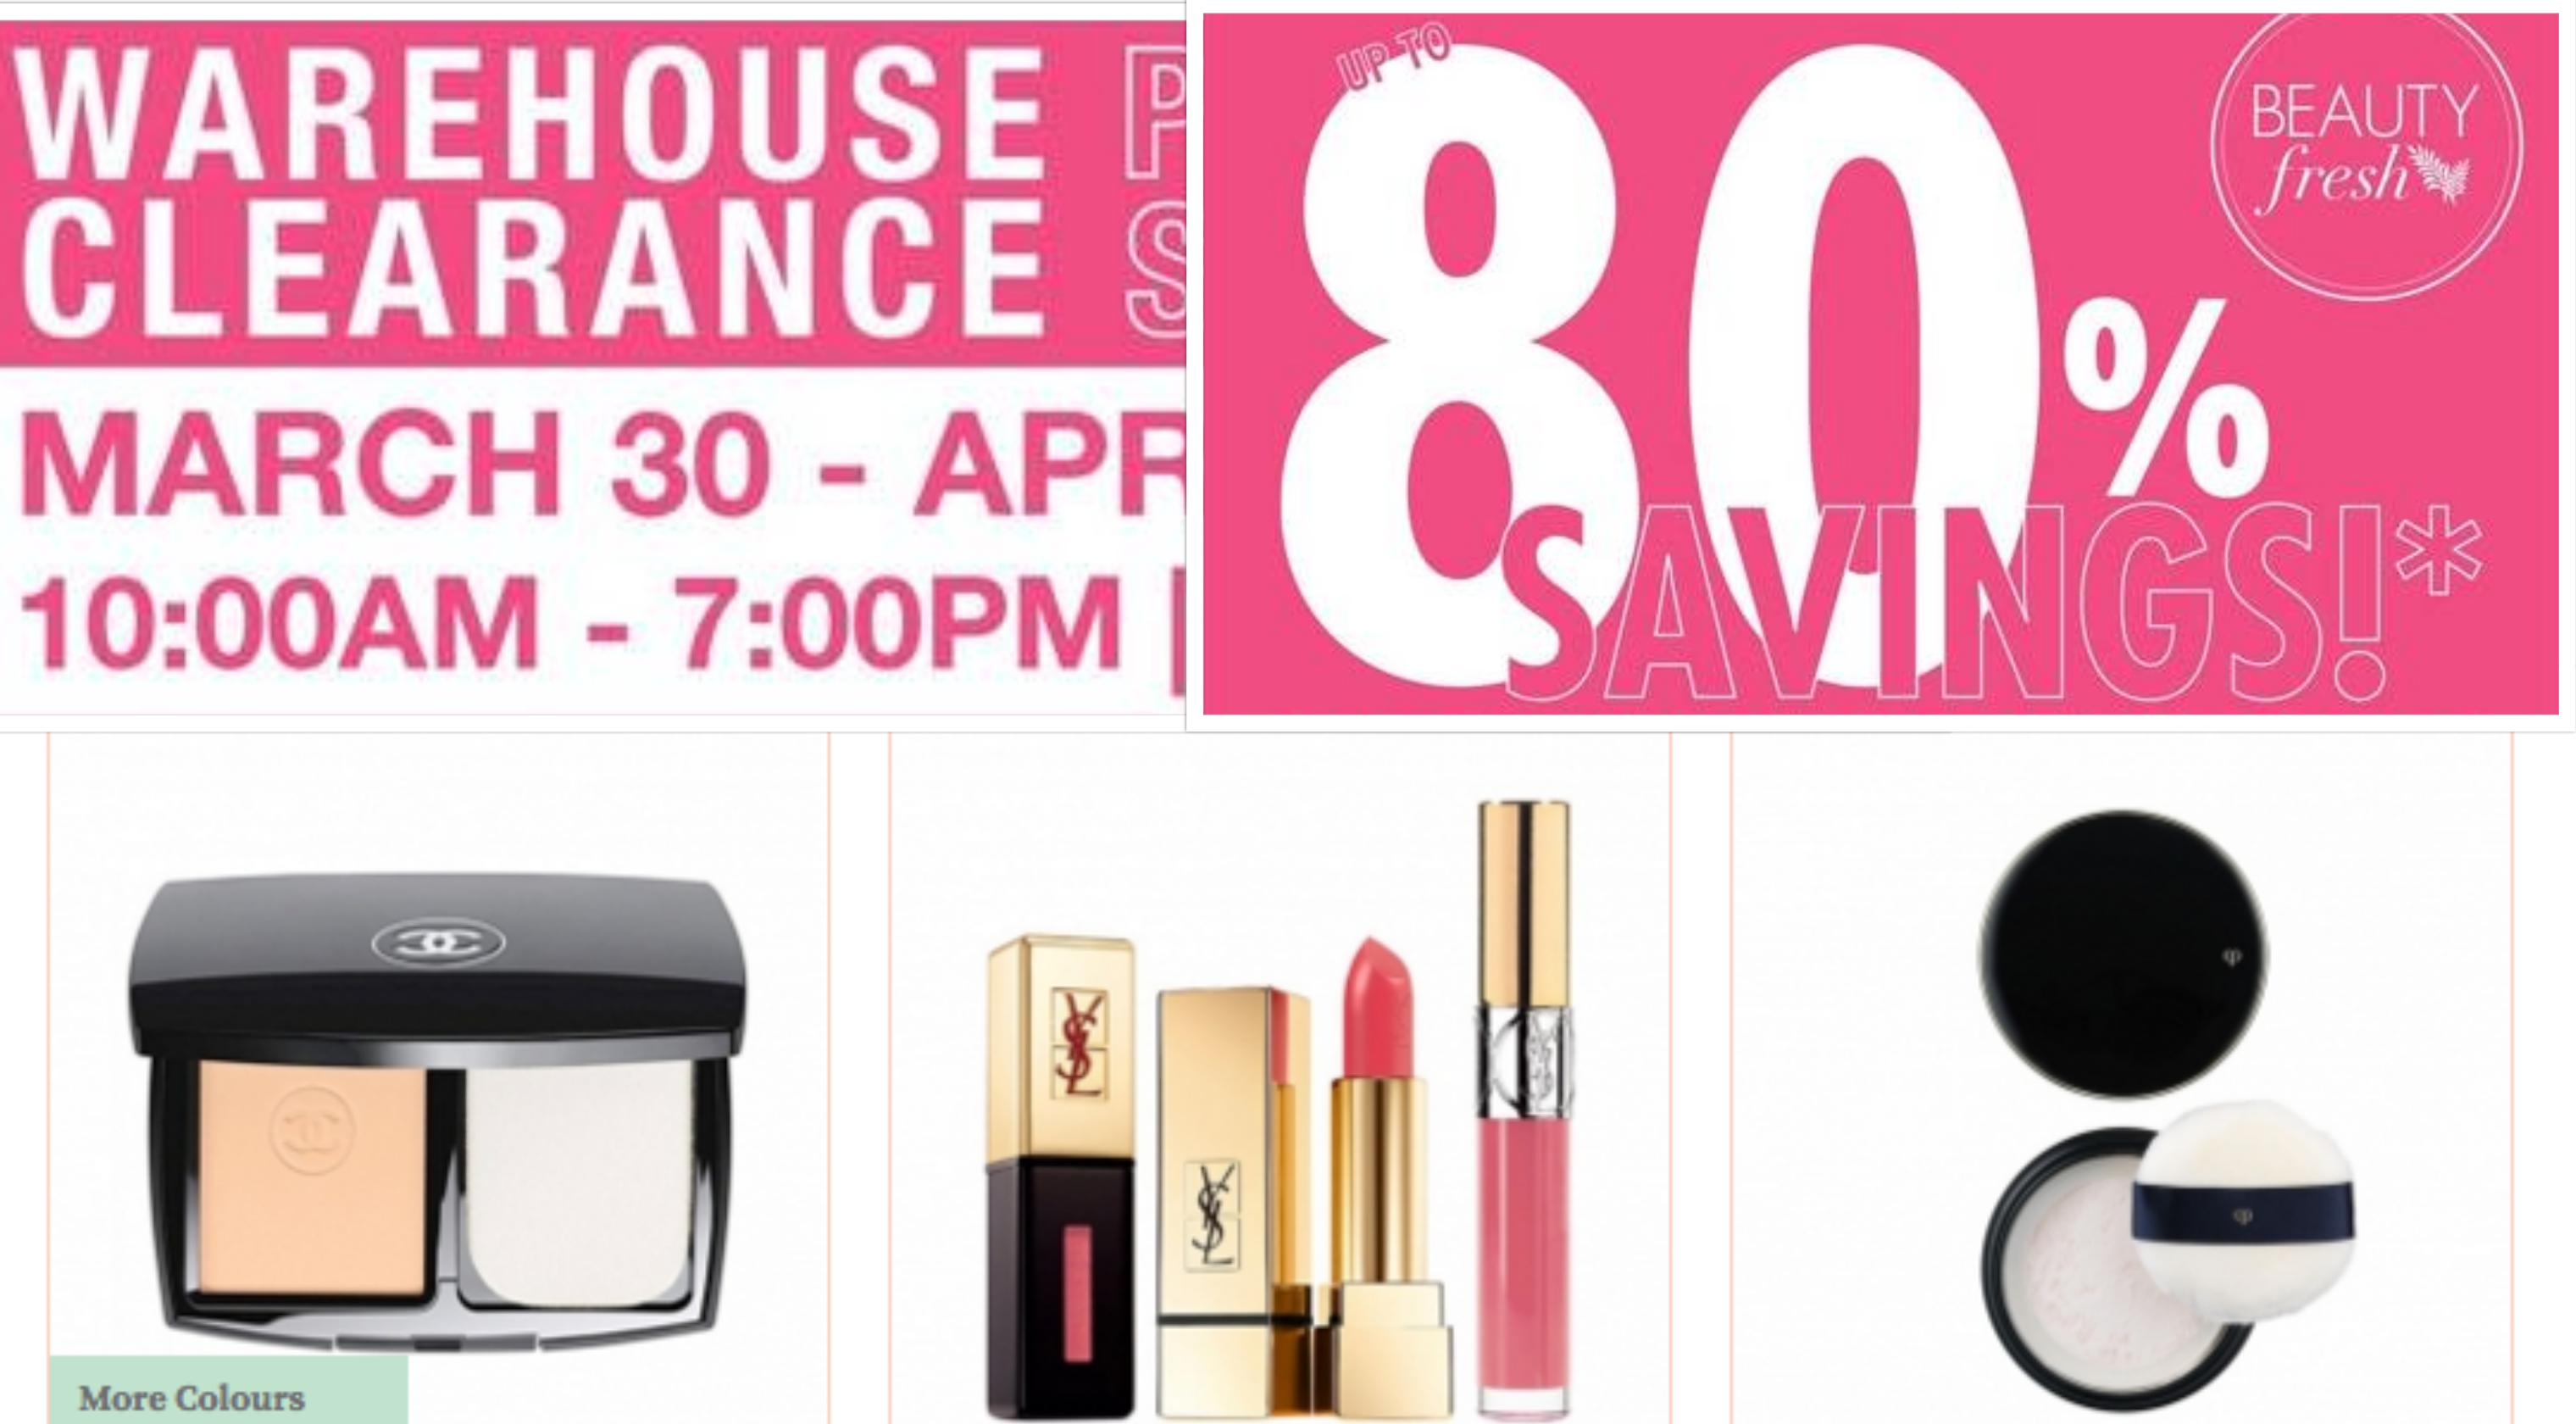 Sidelæns opdragelse hjemme Beauty warehouse sale: up to 80 percent off Chanel, M.A.C, NARS, and more -  Mothership.SG - News from Singapore, Asia and around the world